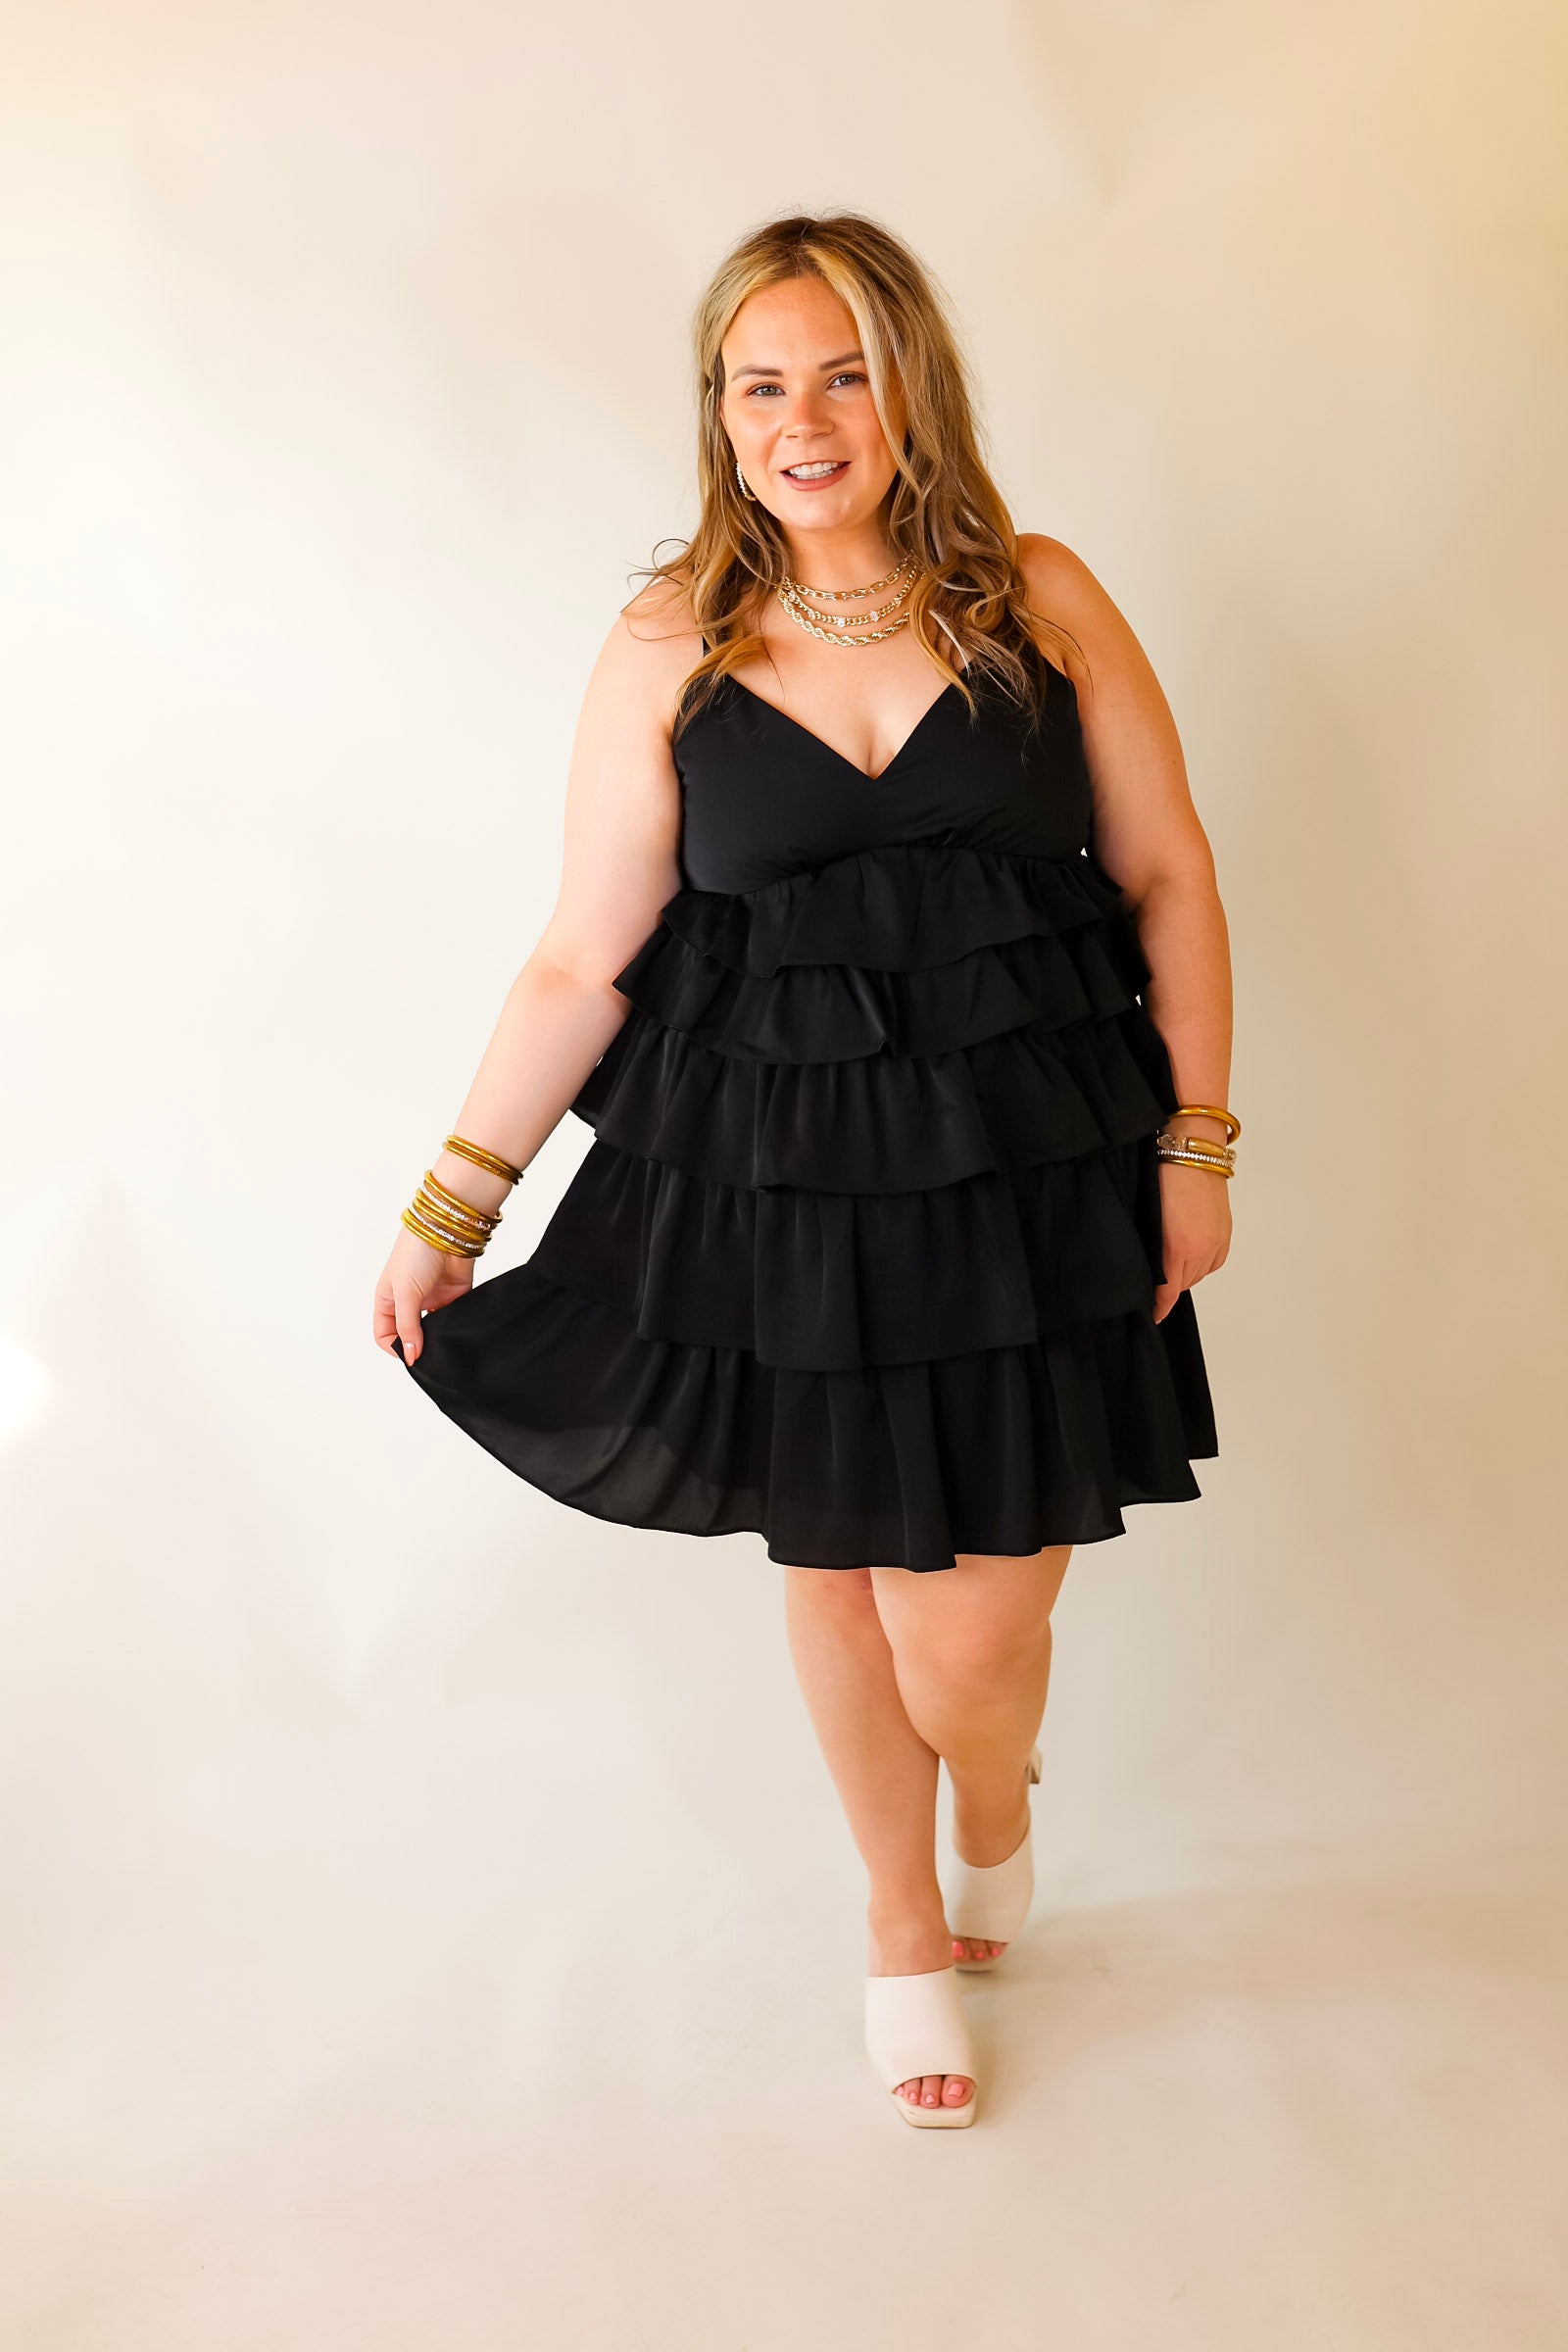 Dare to Dance Ruffled Spaghetti Strap Dress in Black - Giddy Up Glamour Boutique